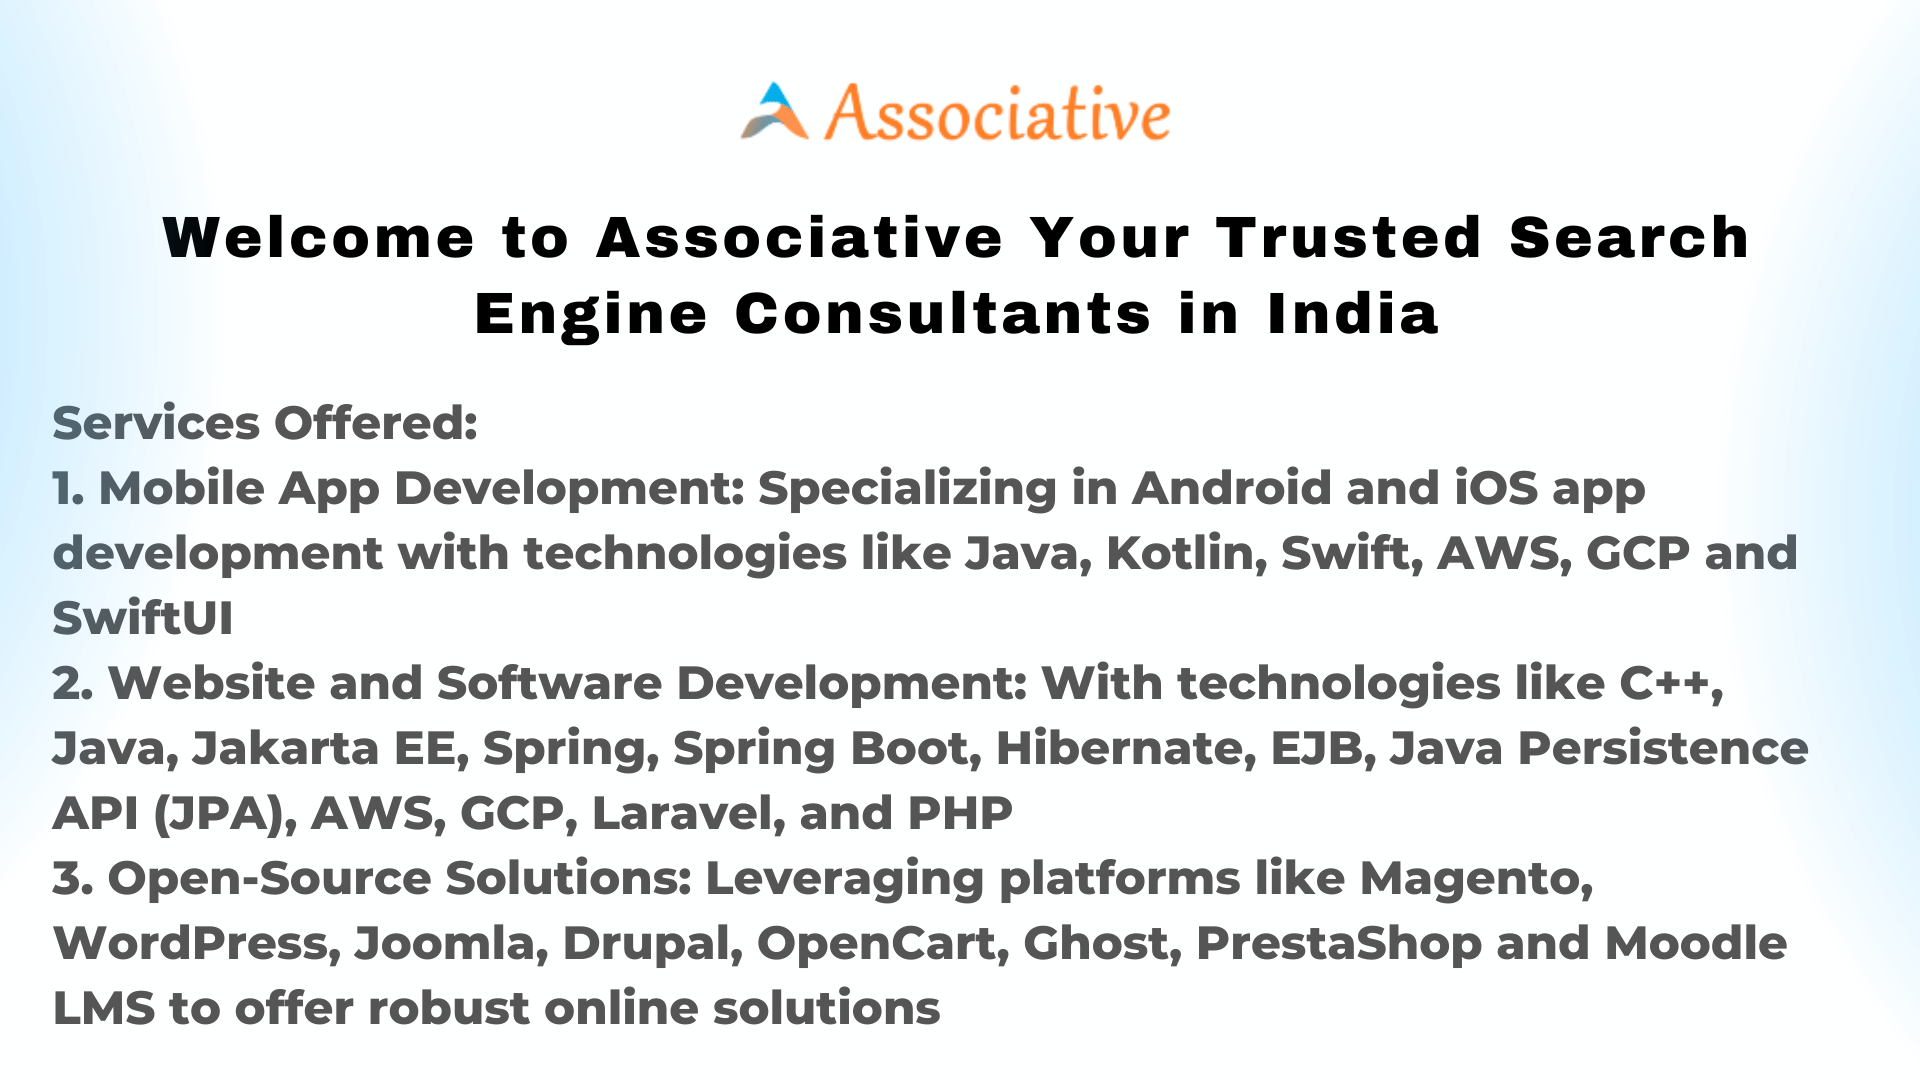 Welcome to Associative Your Trusted Search Engine Consultants in India